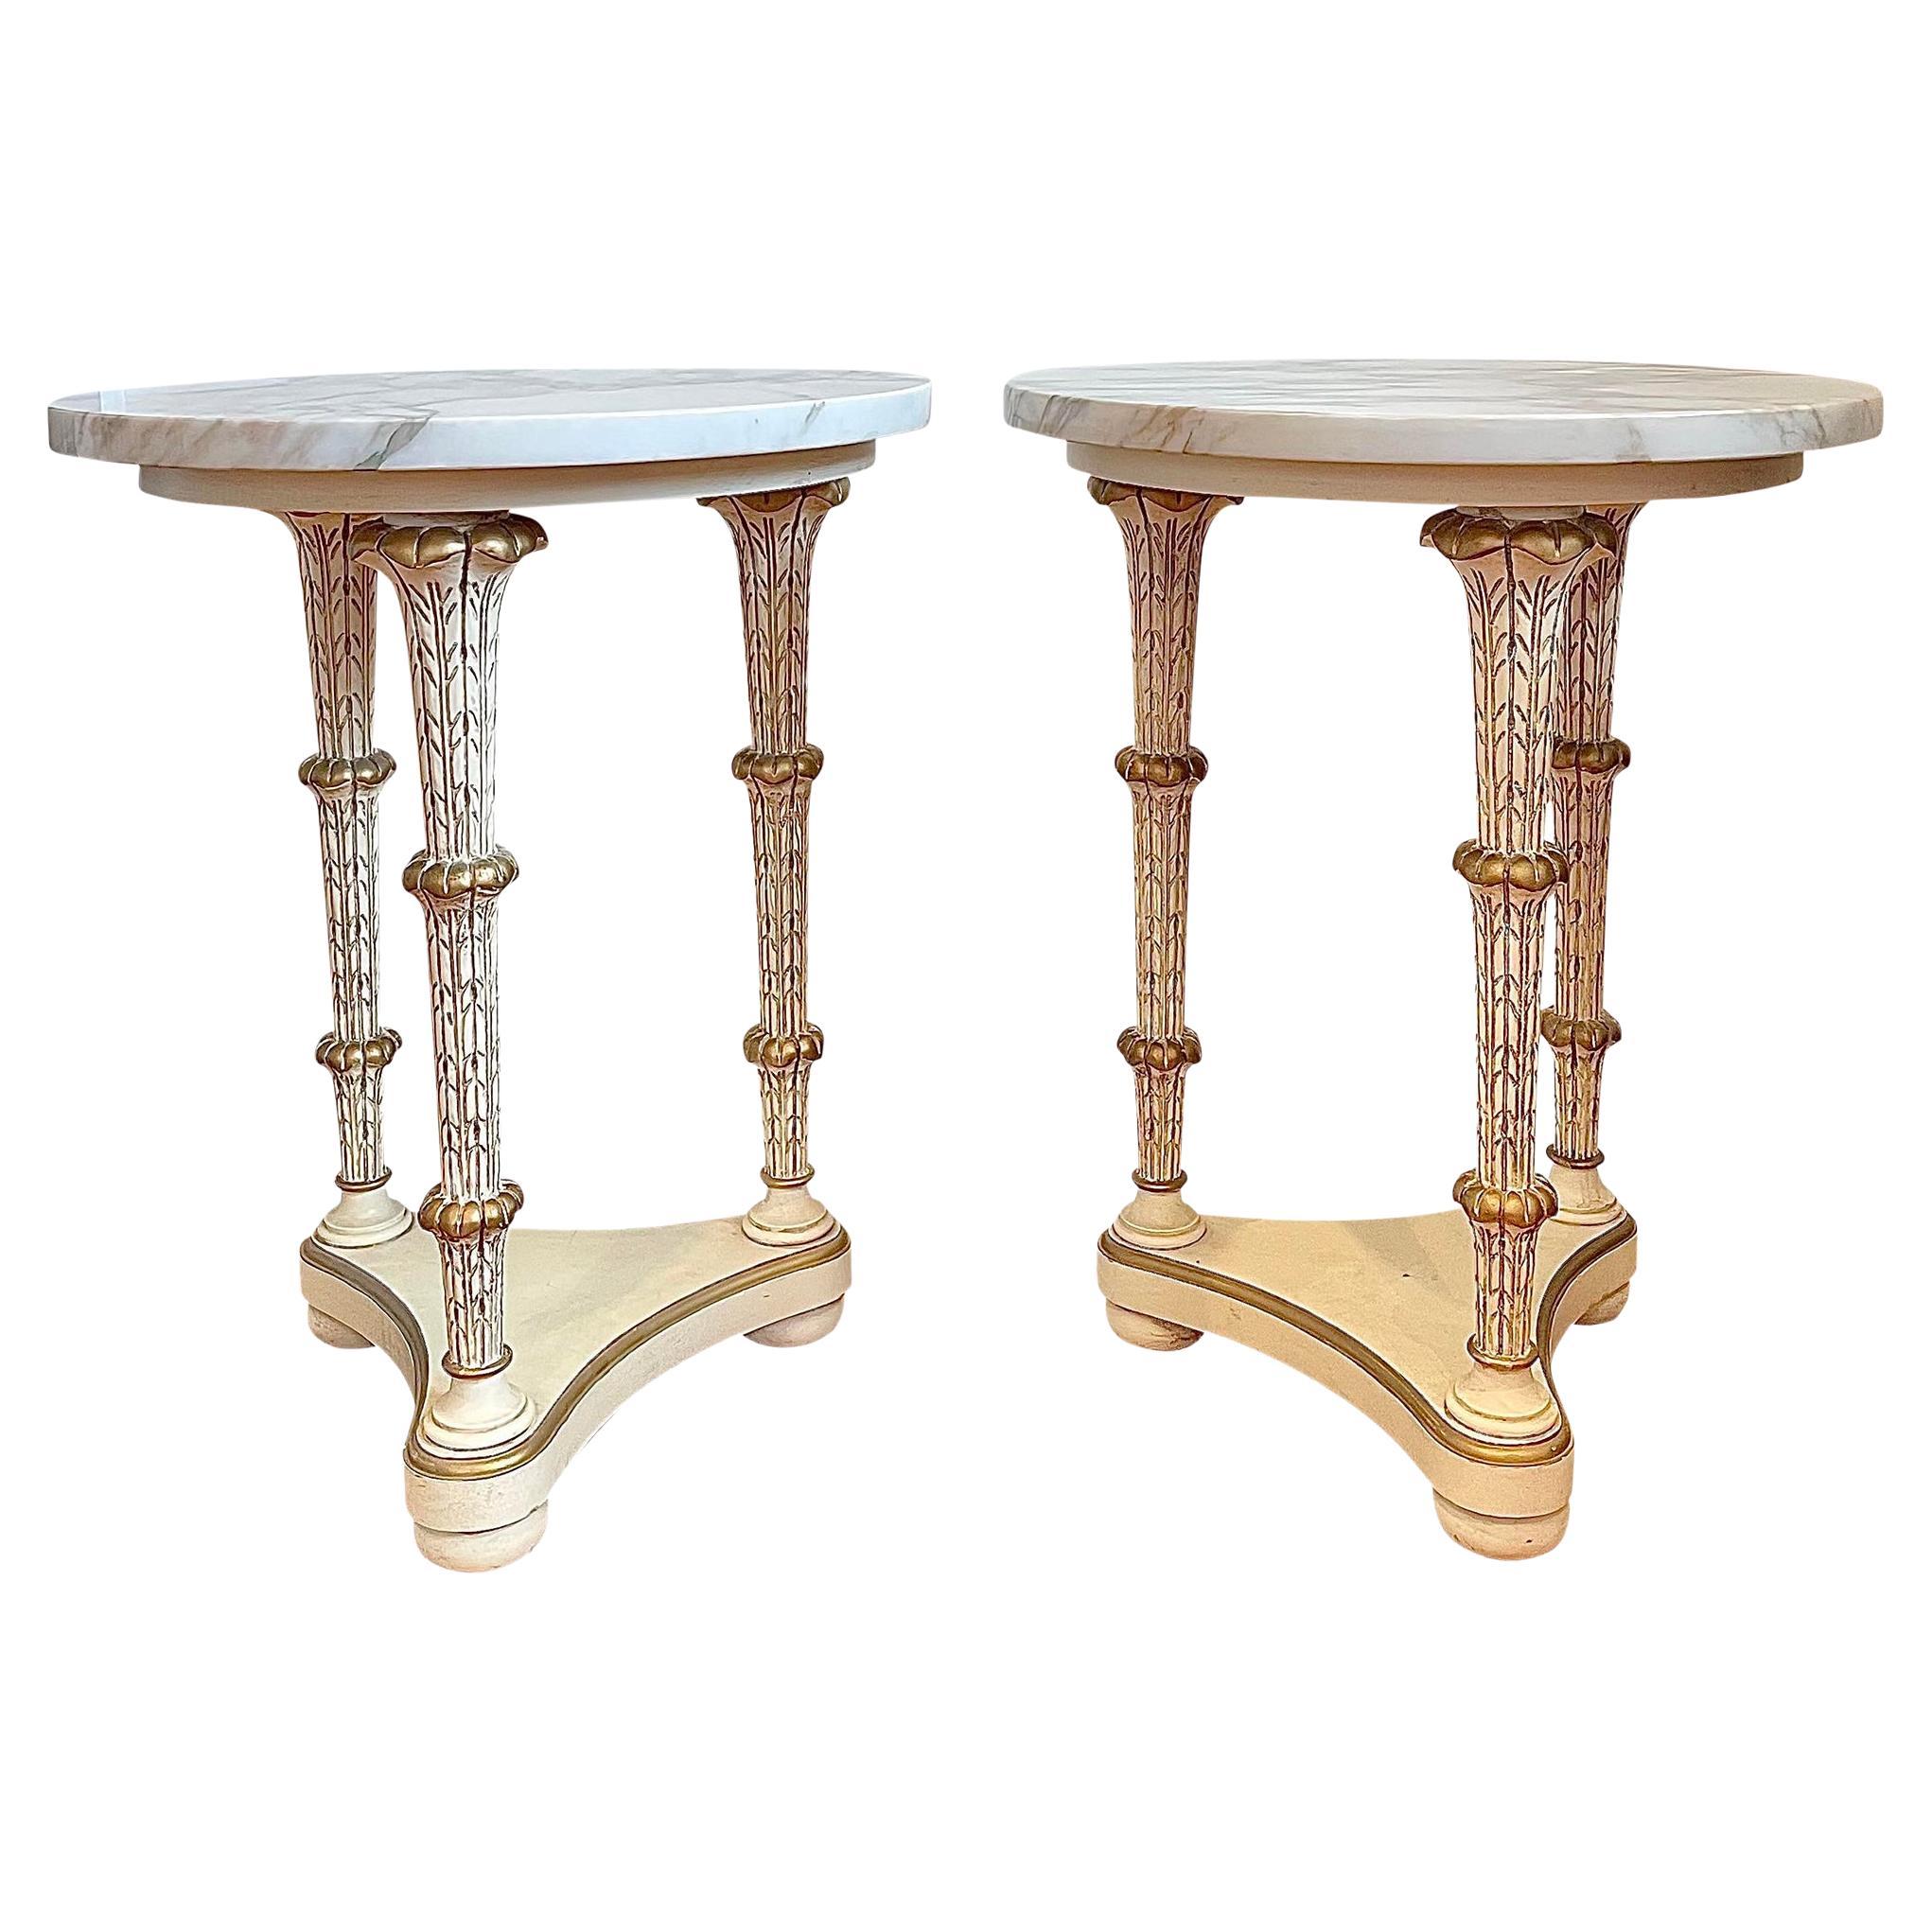 Mid 20th Century Neoclassical Style Marble Top Palm Frond Gueridon Tables For Sale